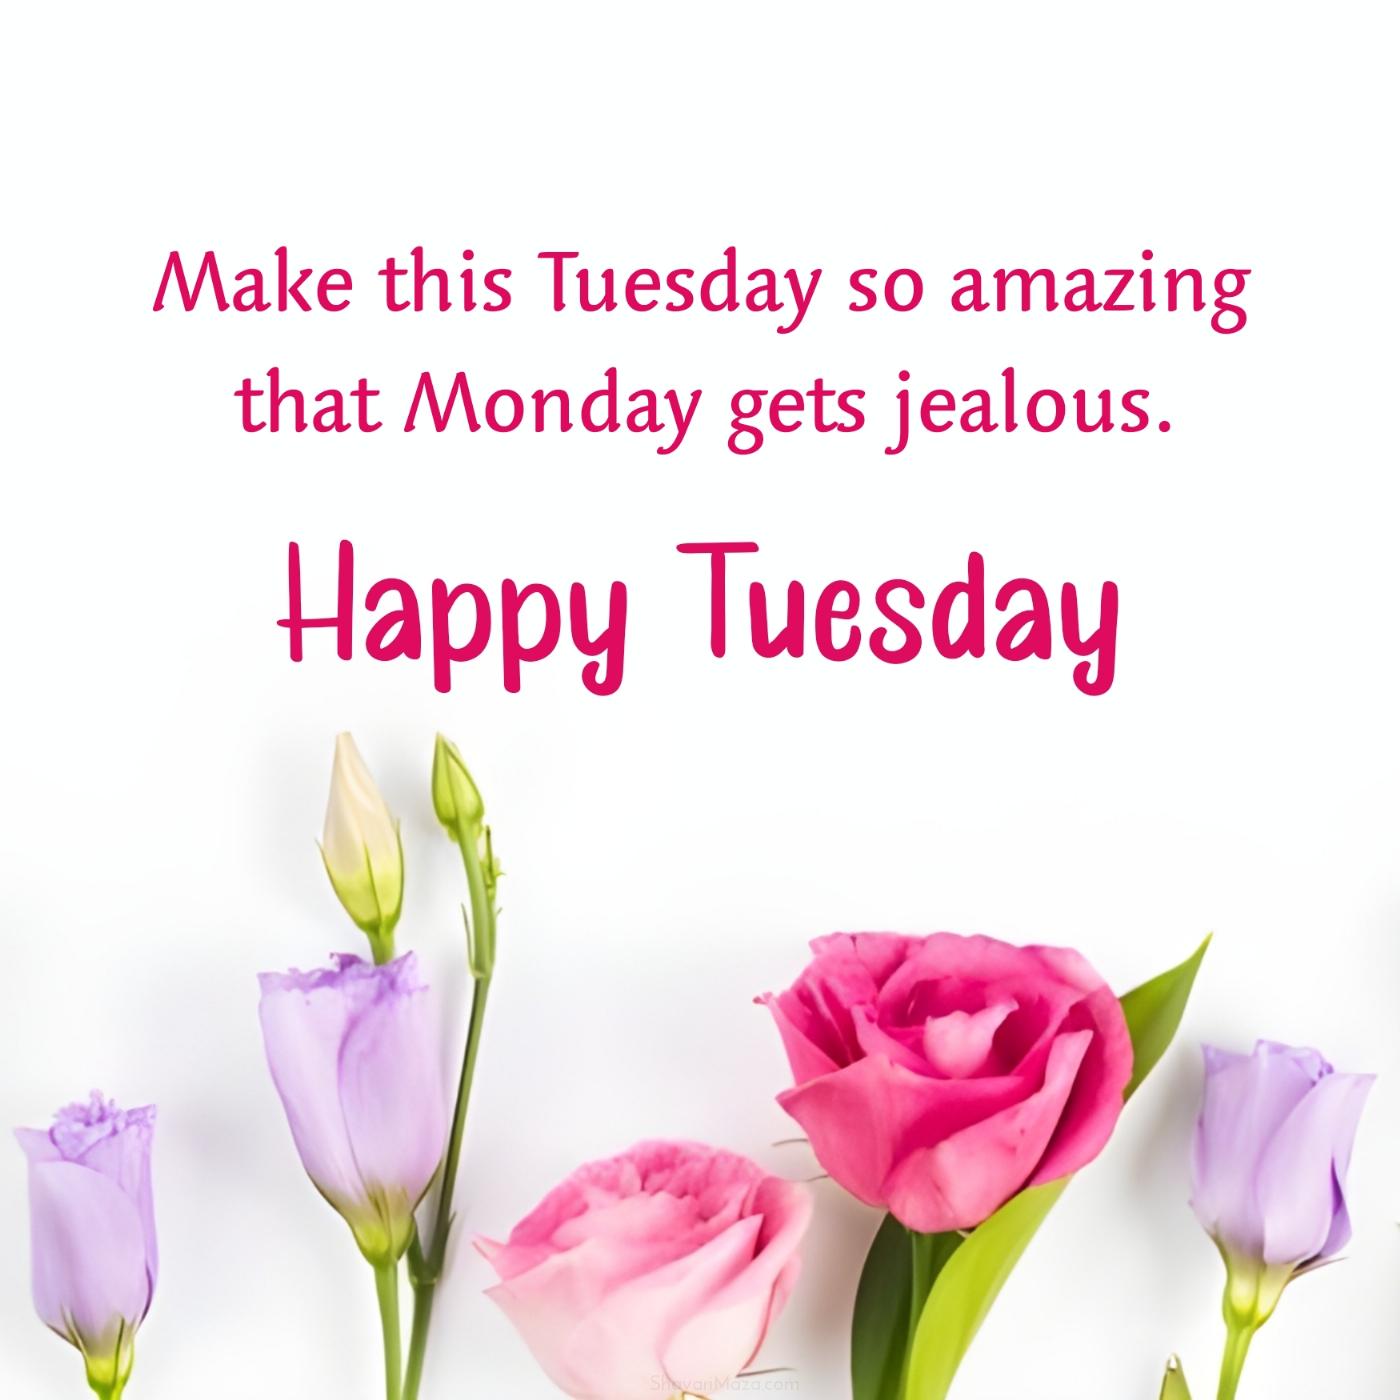 Make this Tuesday so amazing that Monday gets jealous